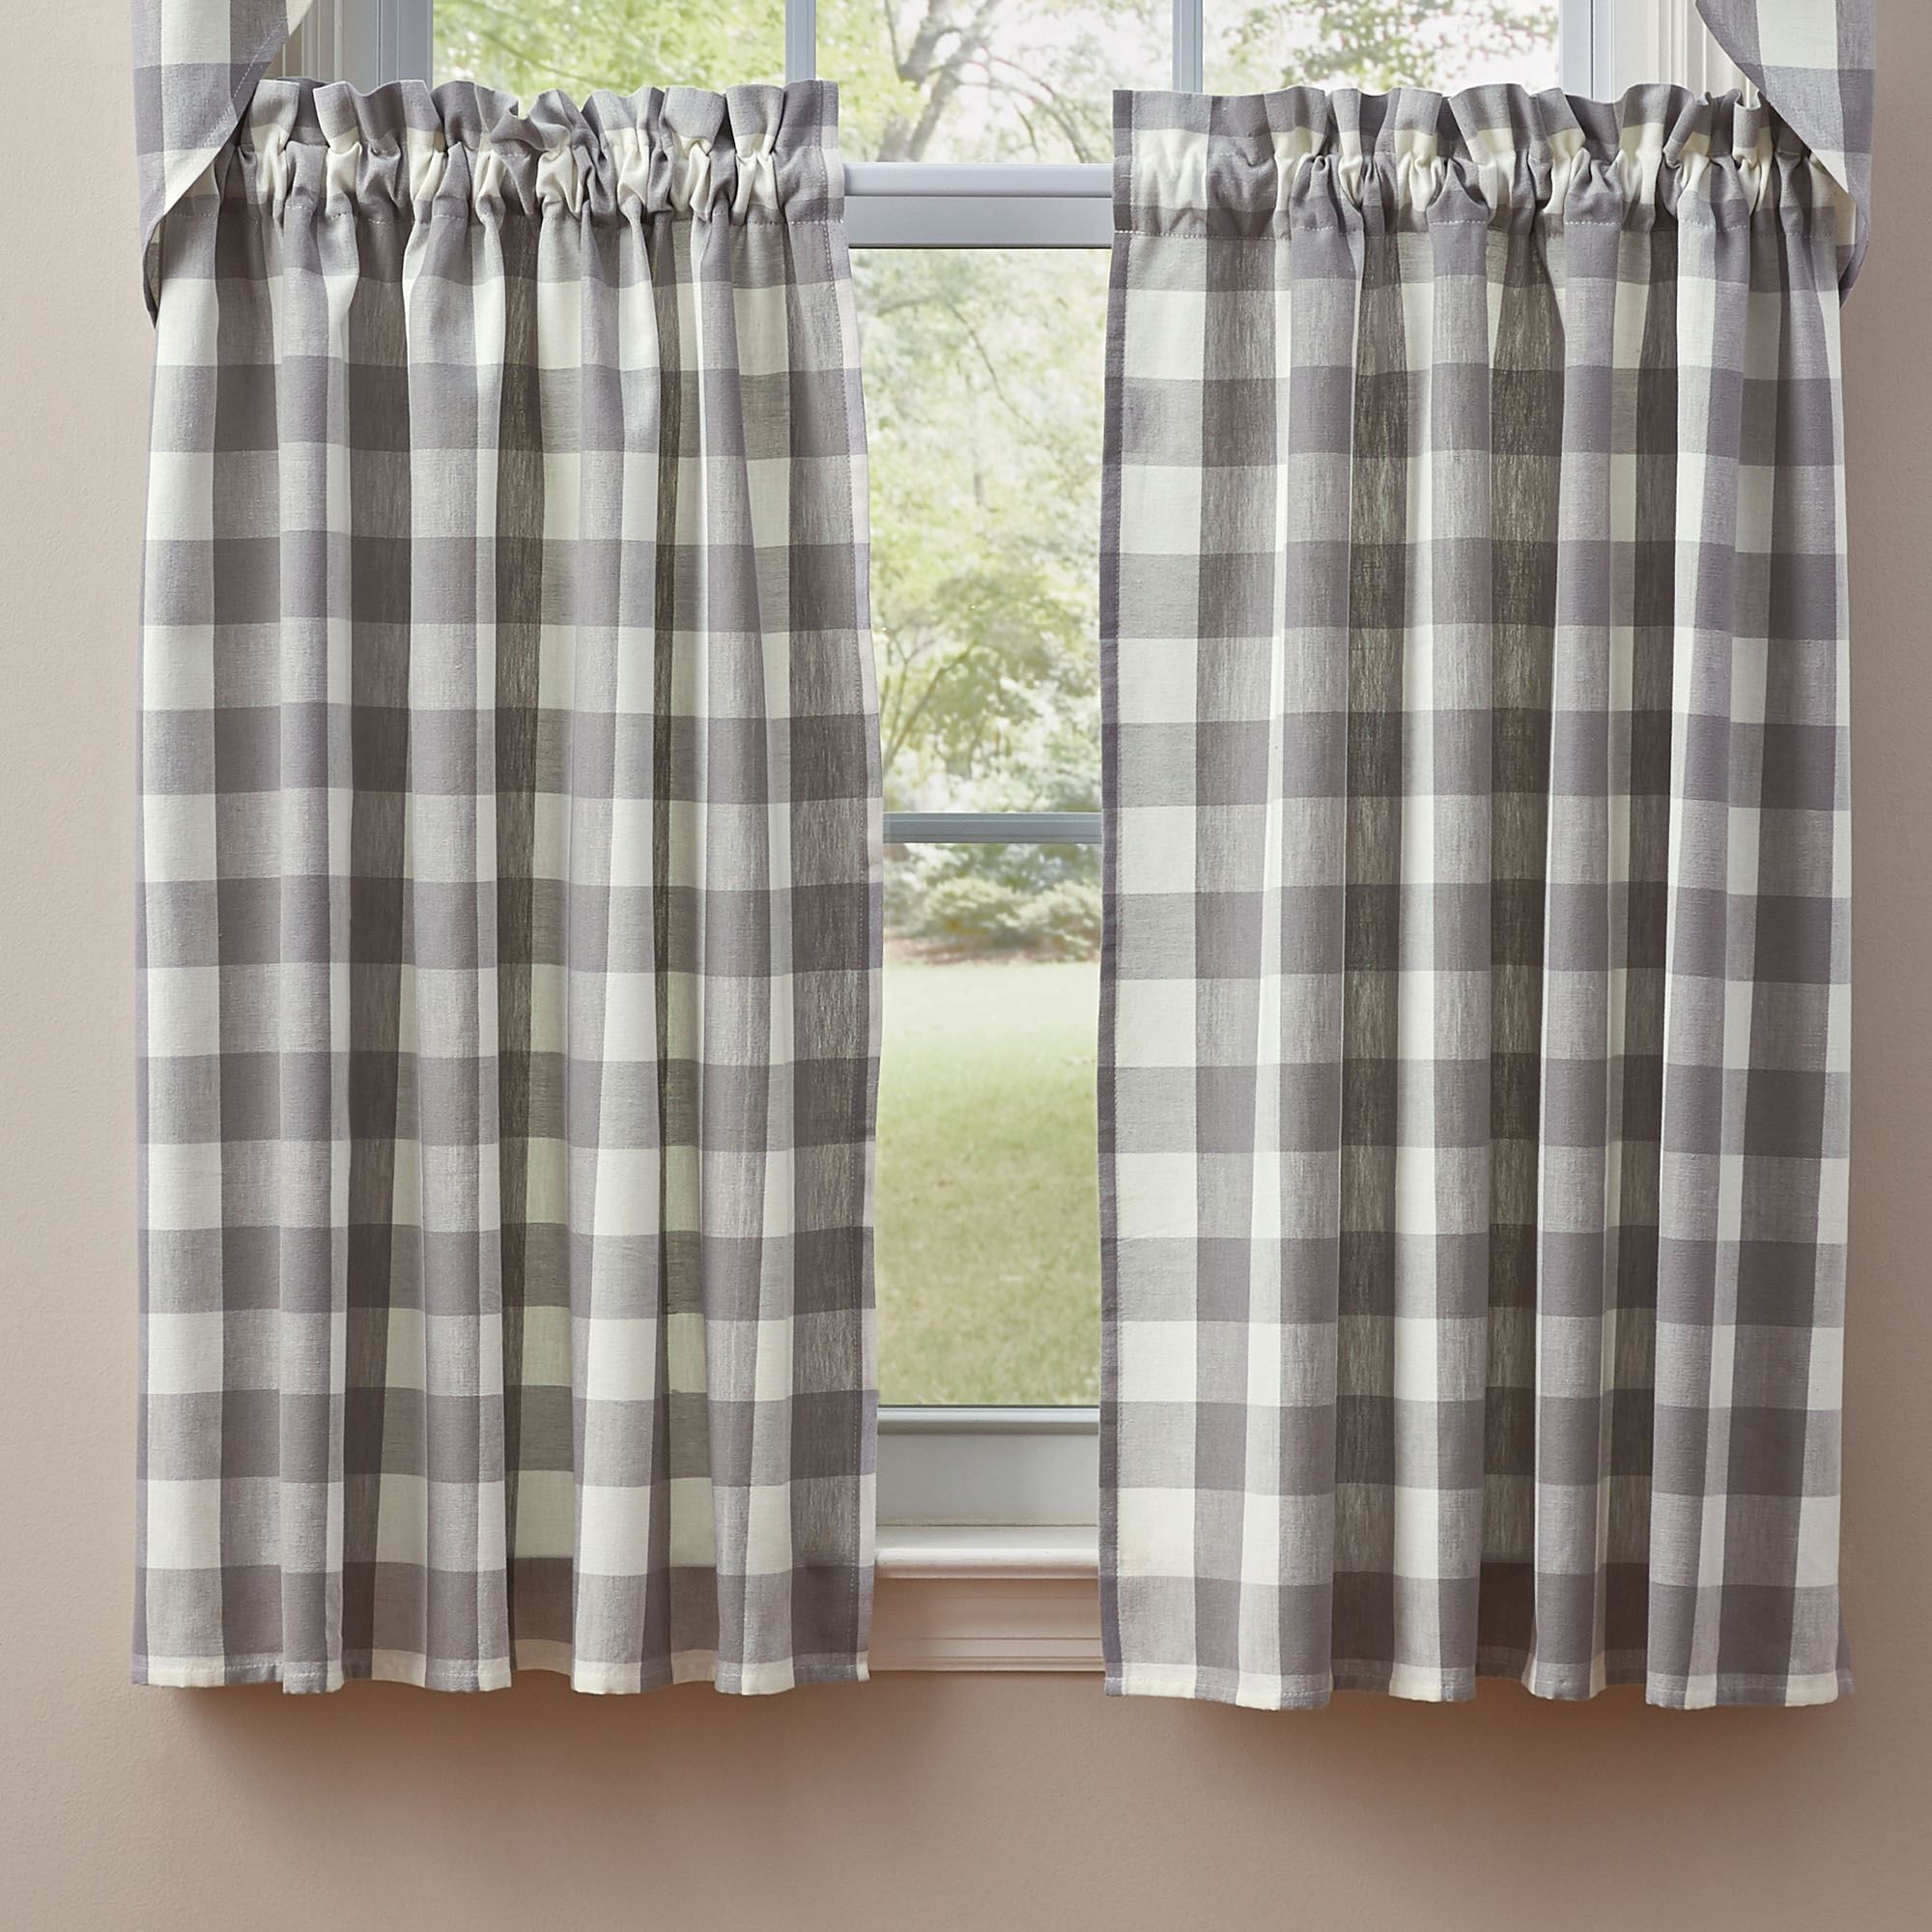 Wicklow Gray Buffalo Check Tier Window Treatment Pertaining To Dove Gray Curtain Tier Pairs (View 16 of 20)